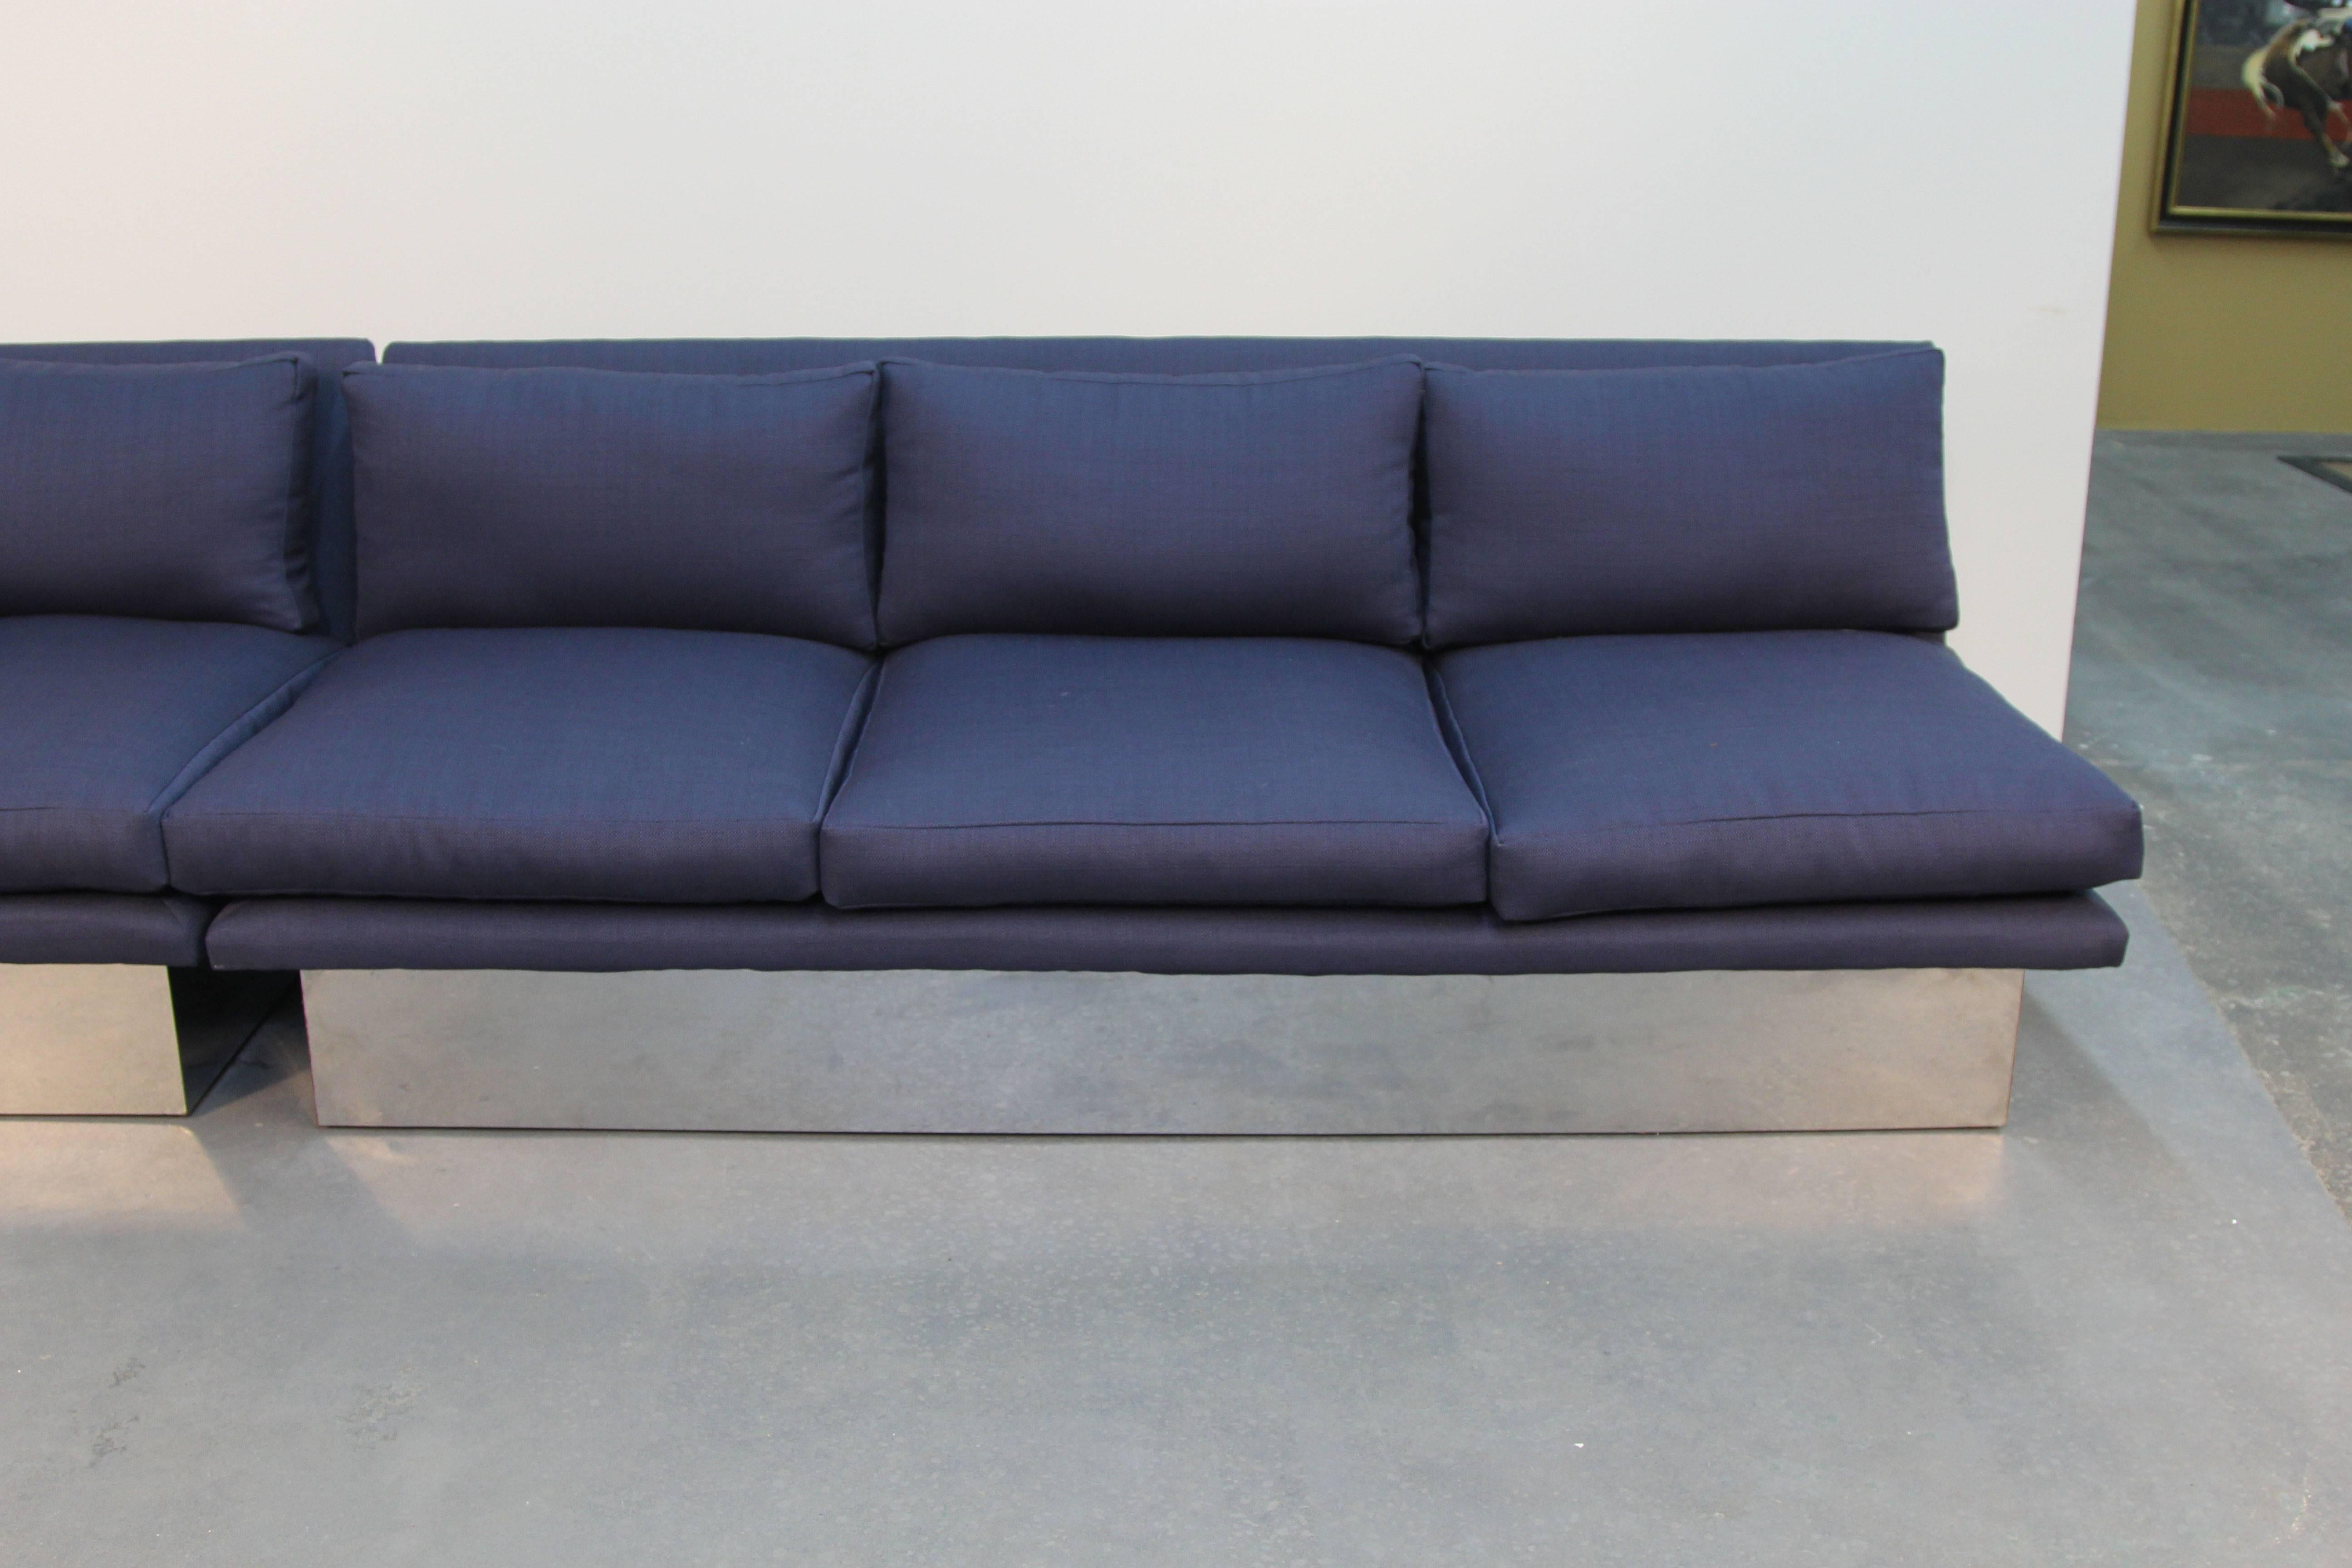 Amazing floating sofa on chrome base. Sofa and chair sectional, newly upholstered in beautiful navy blue textured fabric.